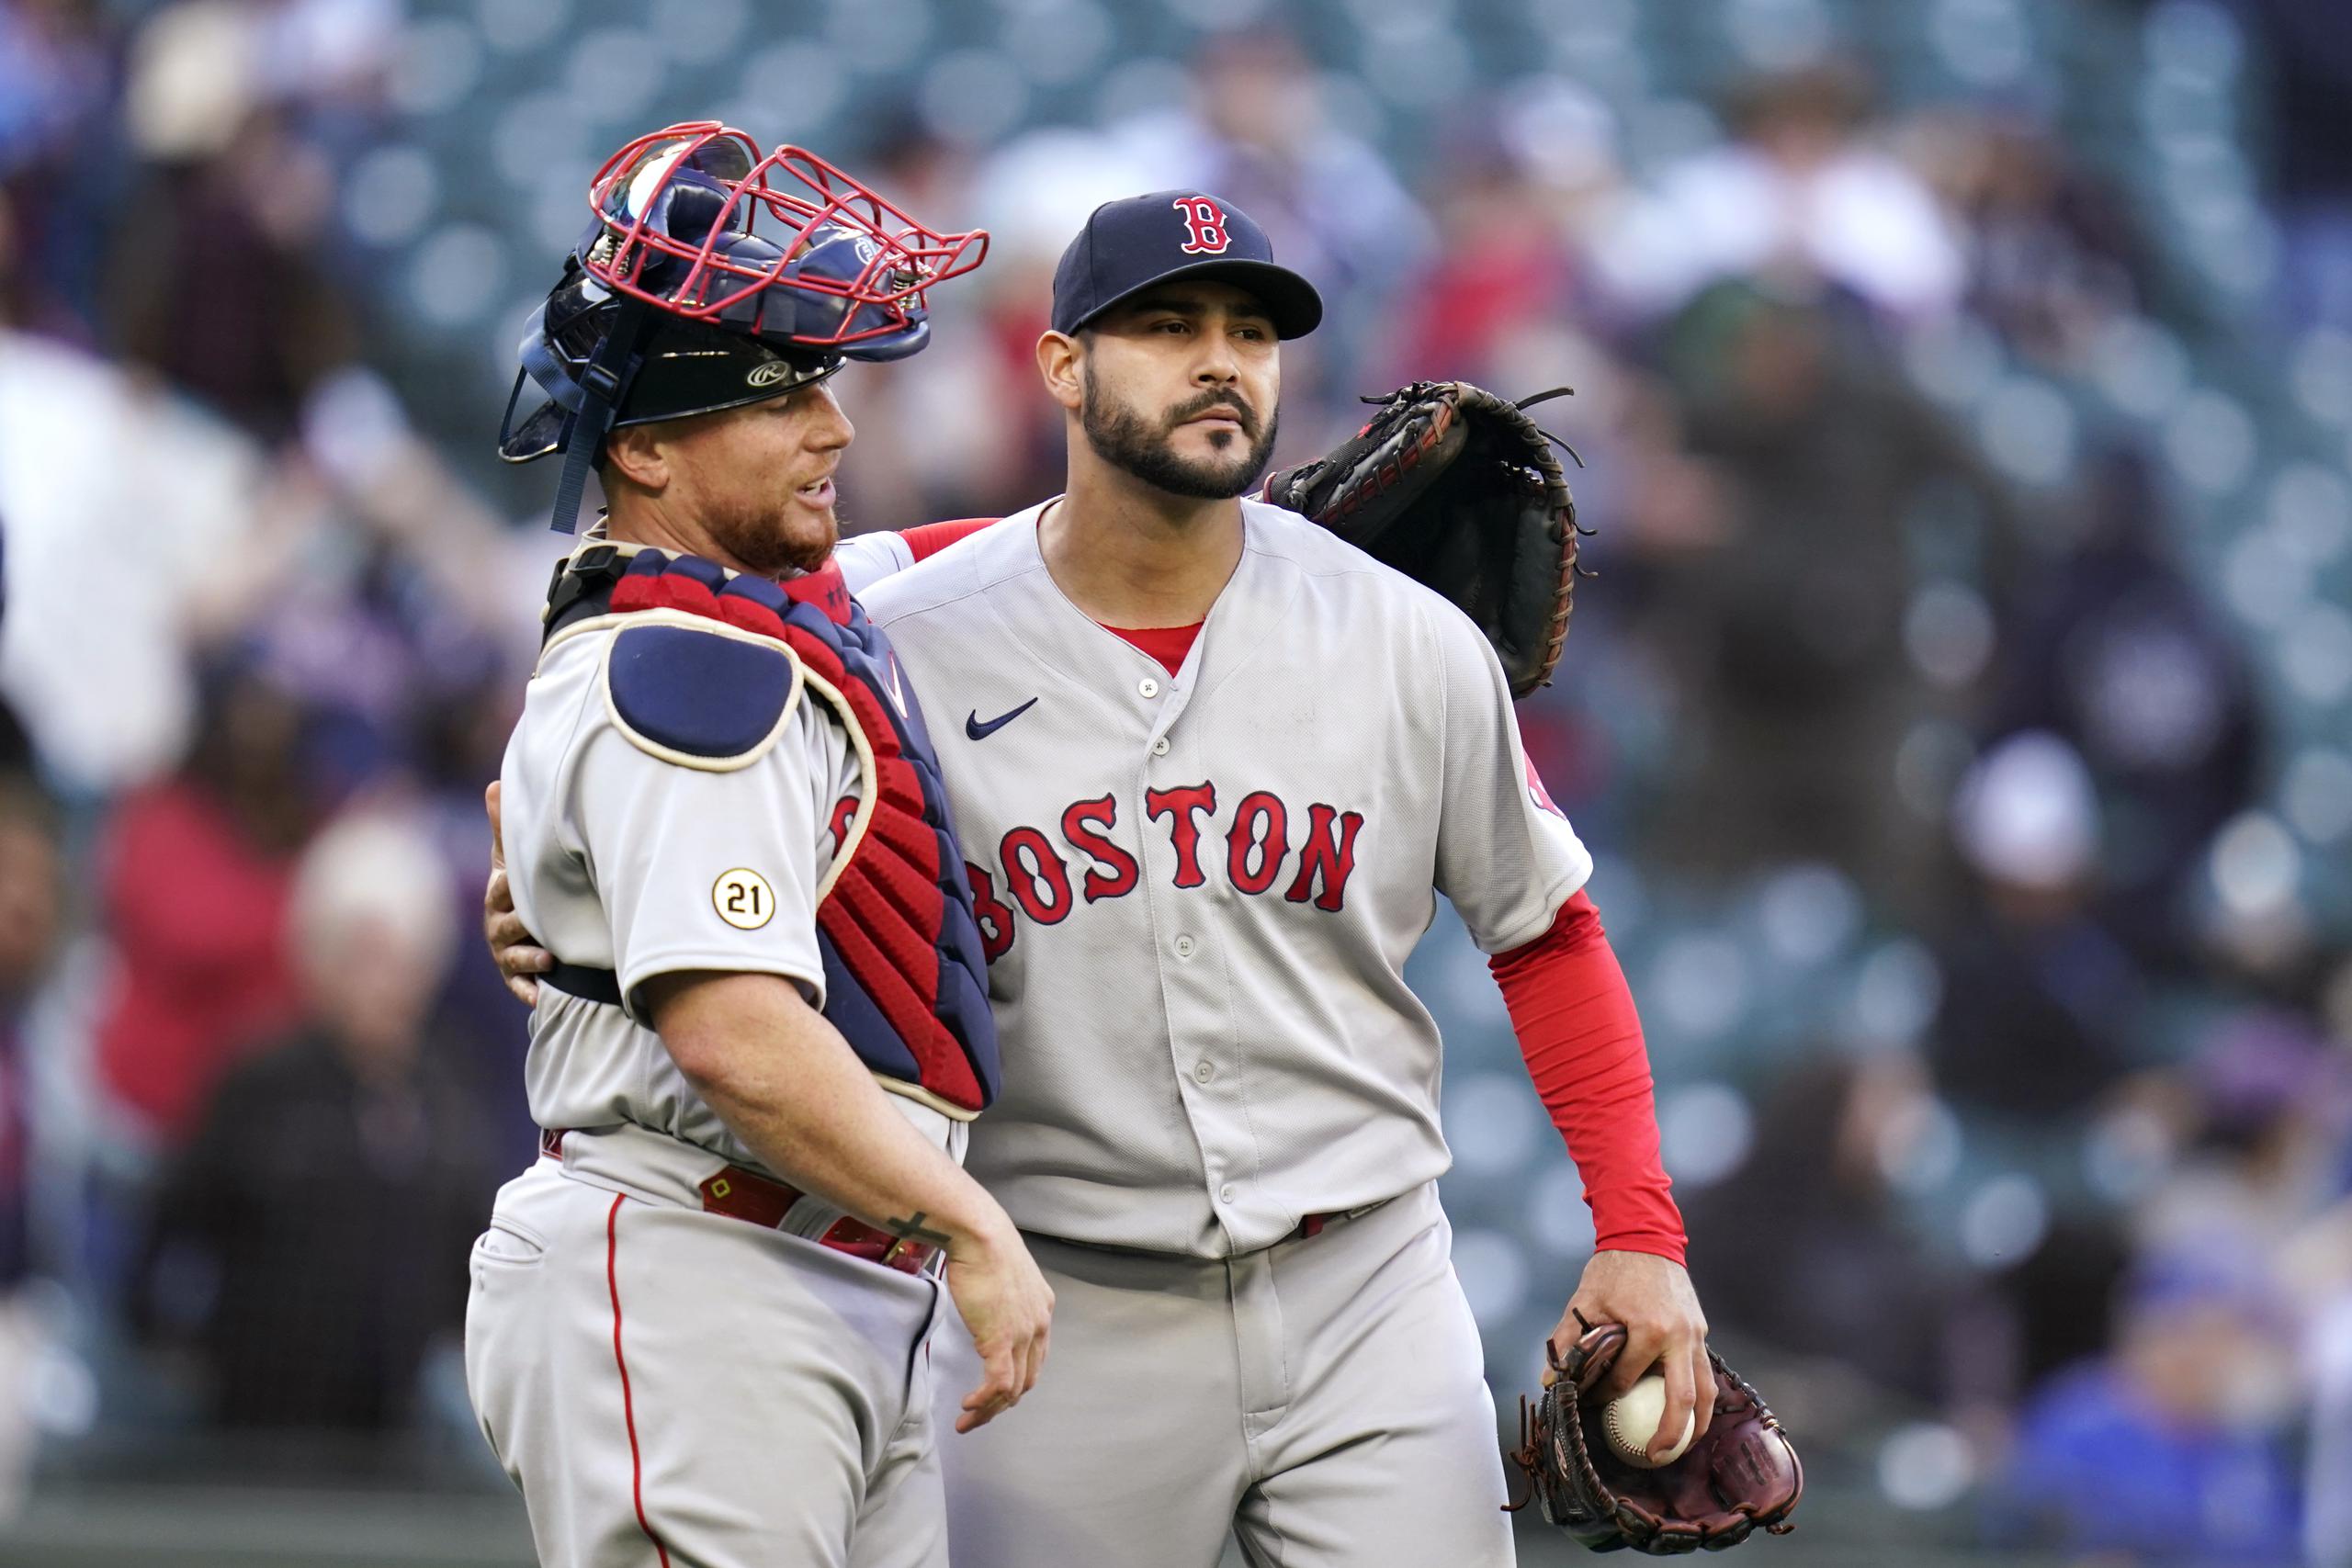 Boston Red Sox catcher Christian Vazquez, left, throws his arm around closing pitcher Martin Perez after the team beat the Seattle Mariners in a baseball game Wednesday, Sept. 15, 2021, in Seattle. The Red Sox won 9-4 in 10 innings. (AP Photo/Elaine Thompson)